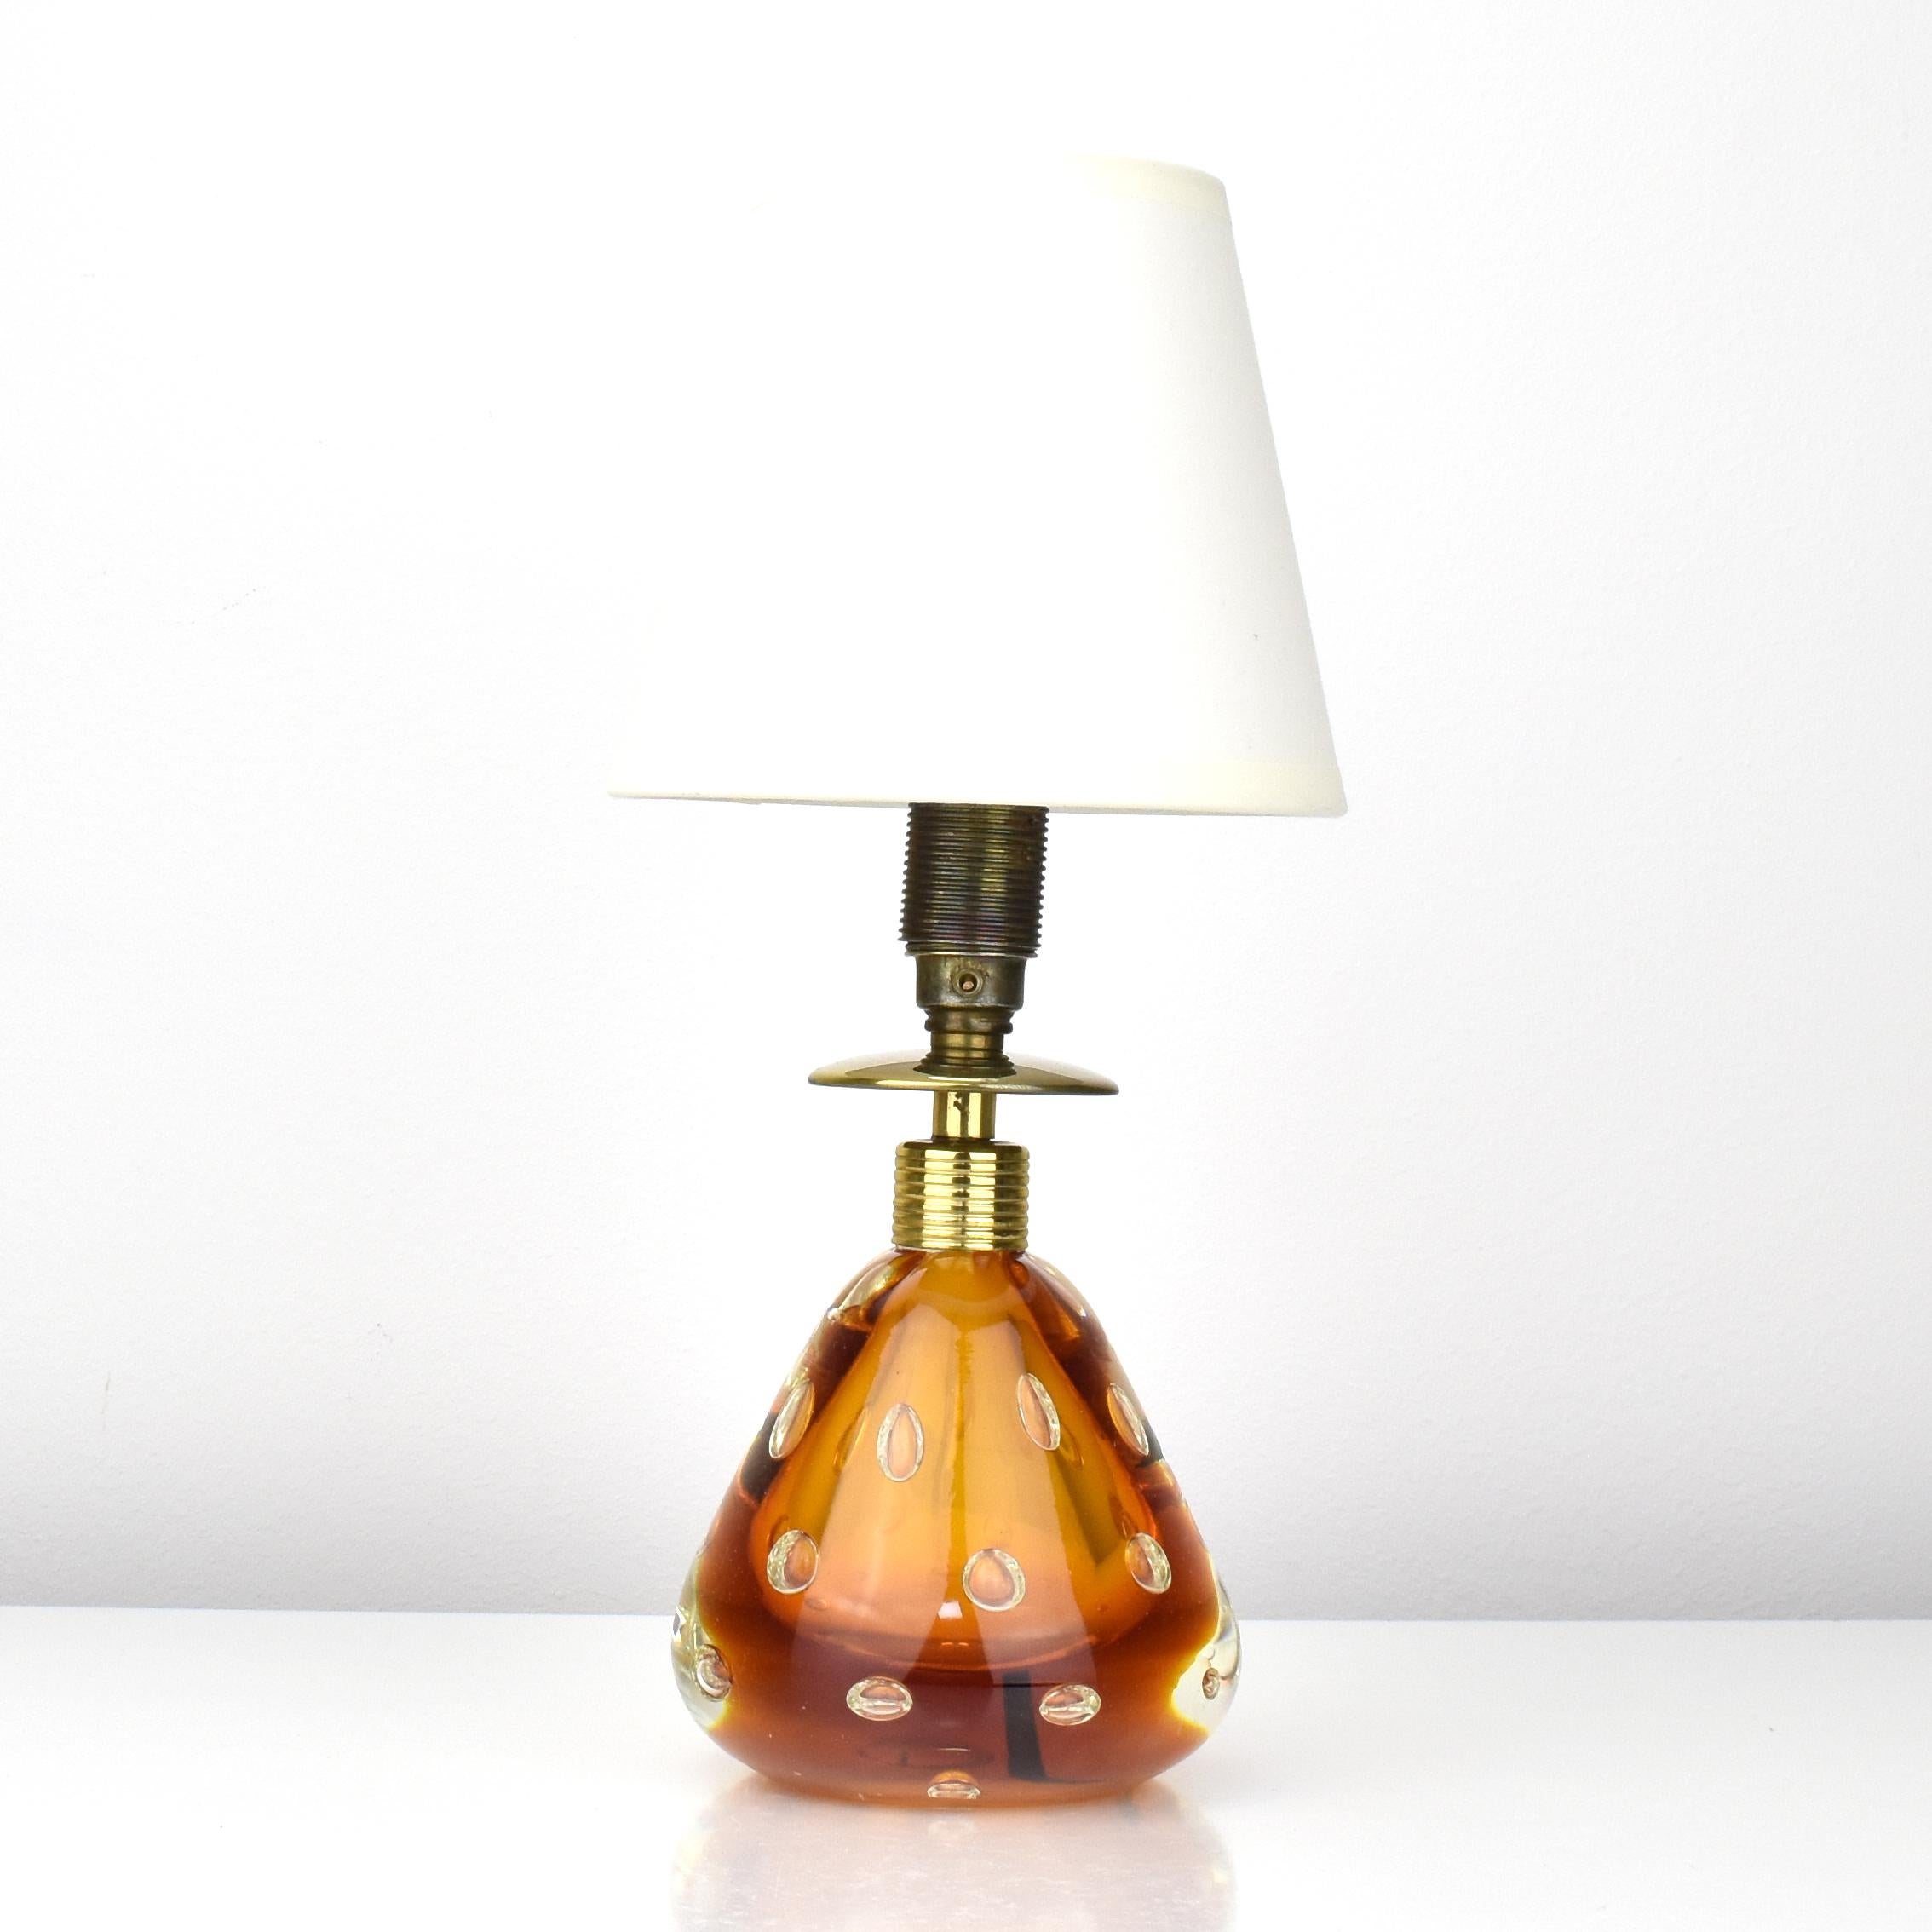 A cute small sized table lamp made of clear cased amber colored art glass with controlled bubbles in 